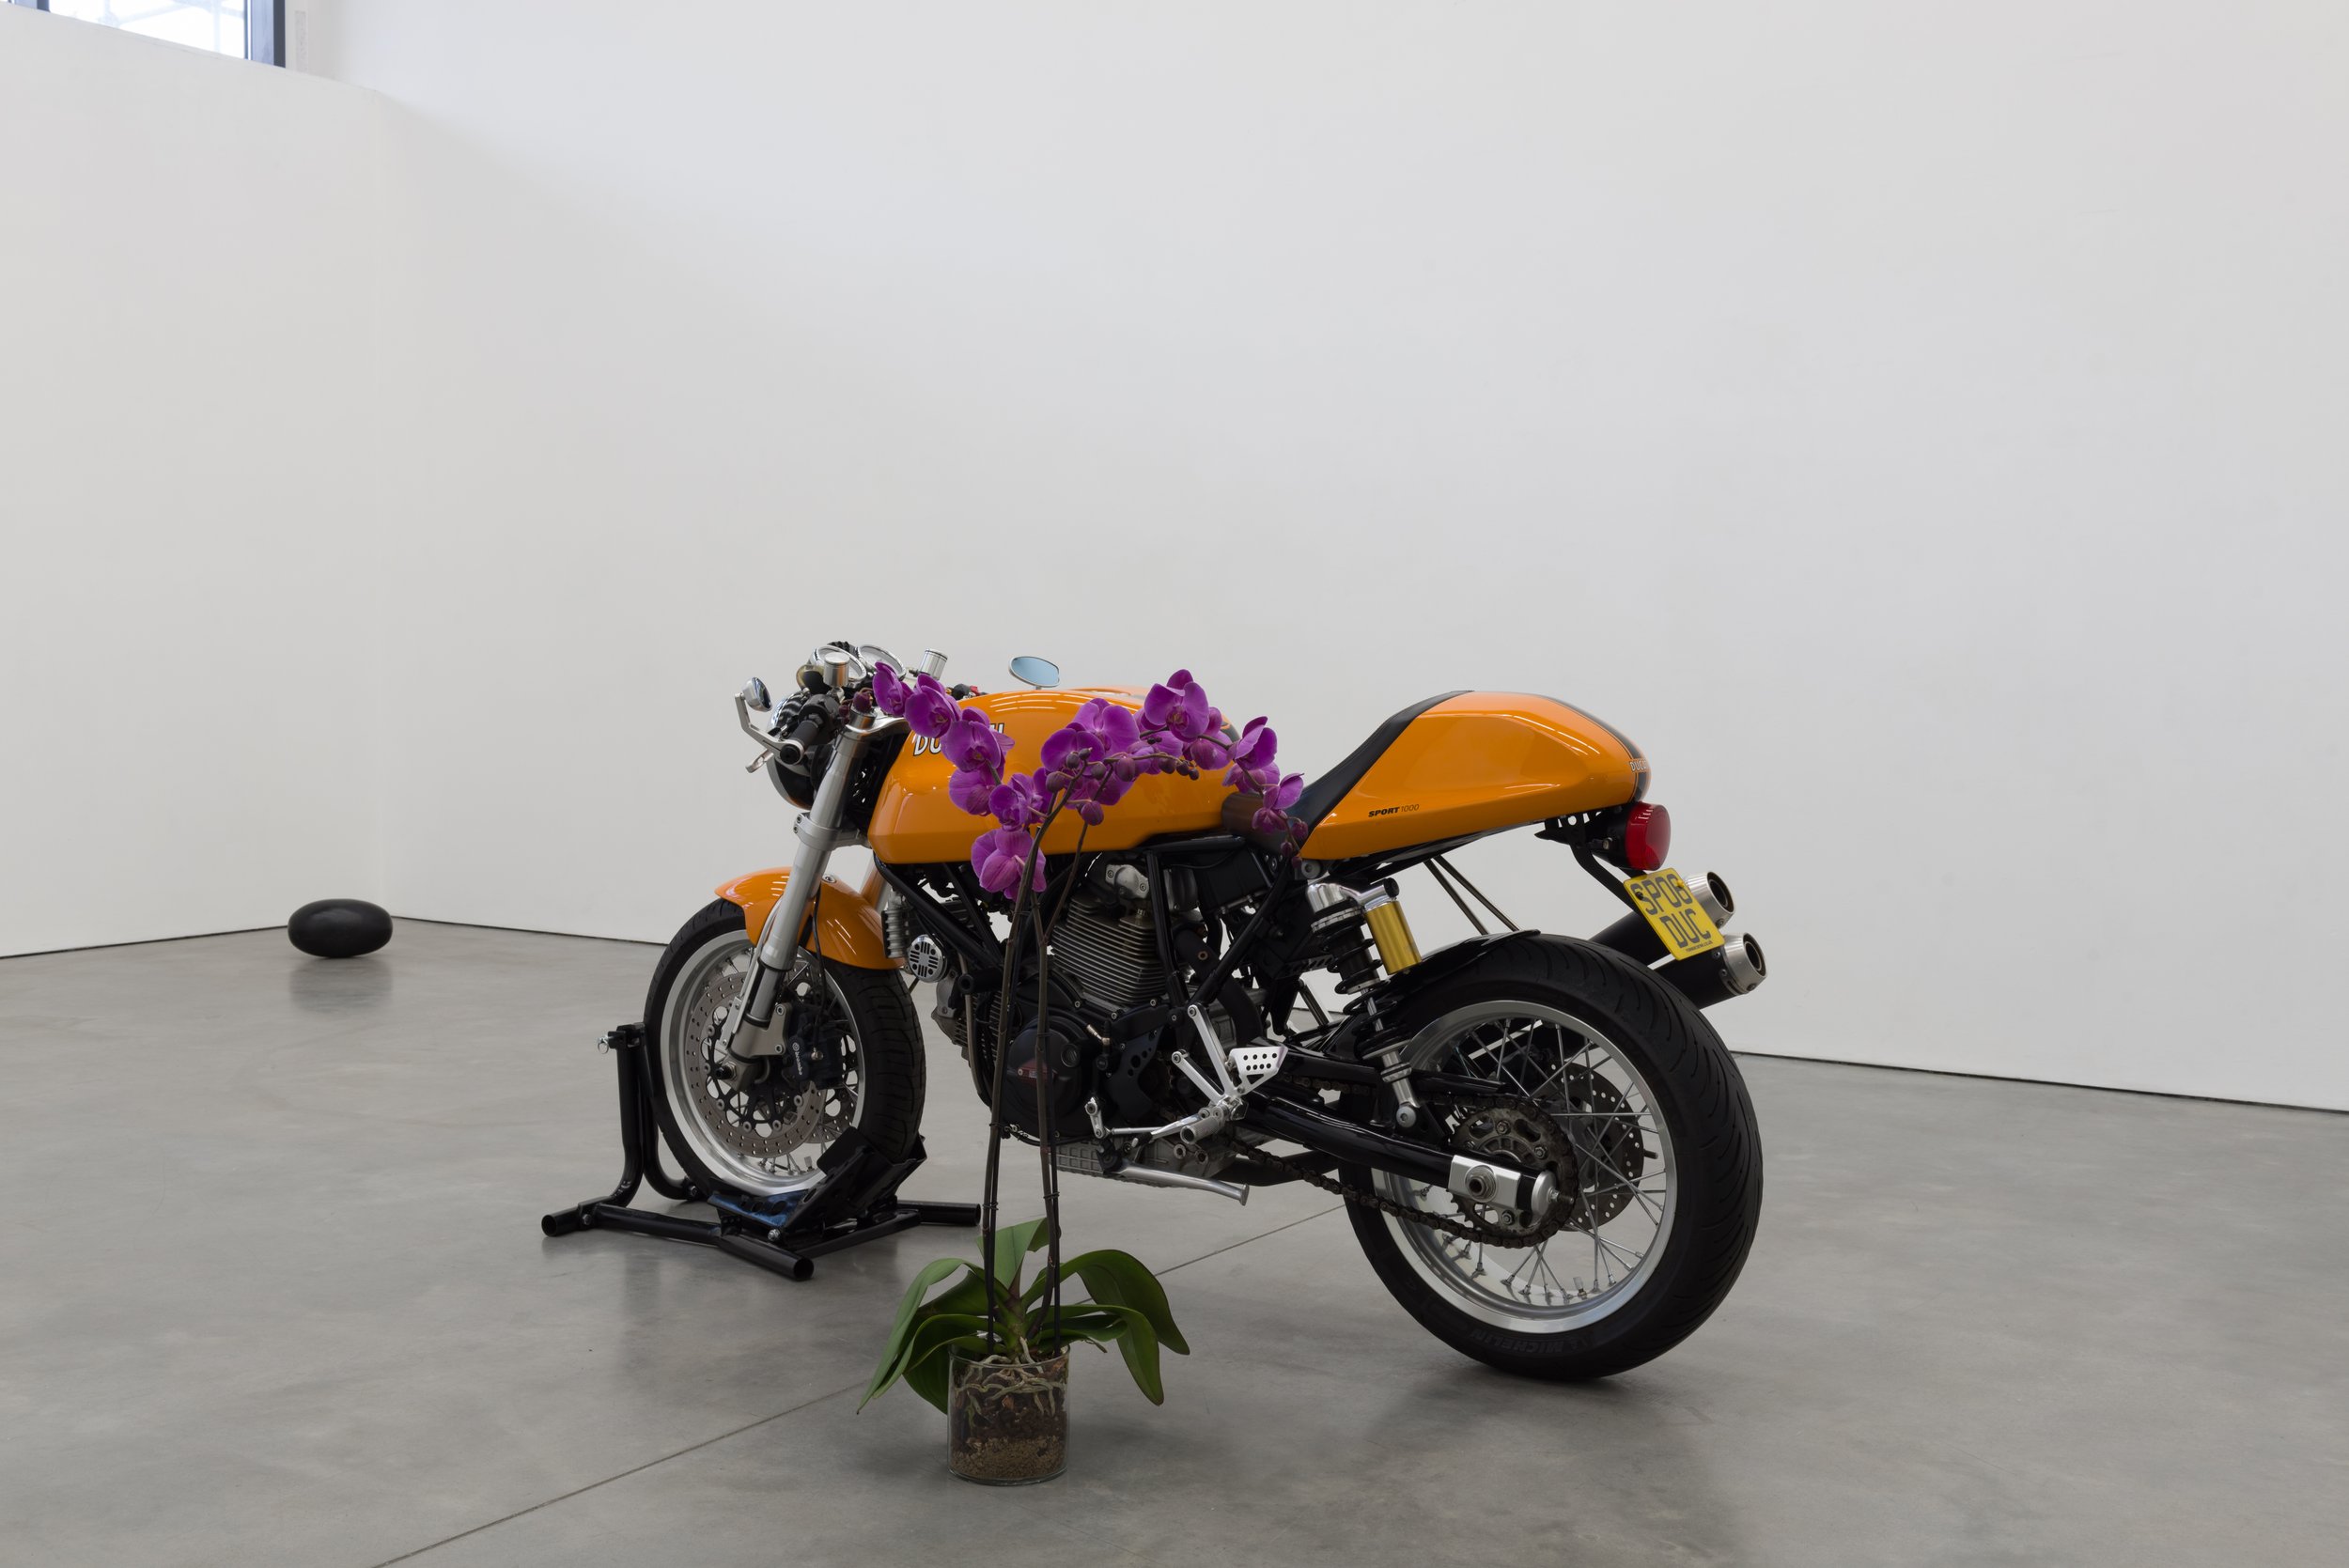  blistering dawn, a reddish young orange speed, above the metal (after Fabio Taglioni)  Ducati Sport I 1000 Momposto motorbike (2006), purple, Phalaenopsis orchid, glass vase, variable dimensions, 2020 